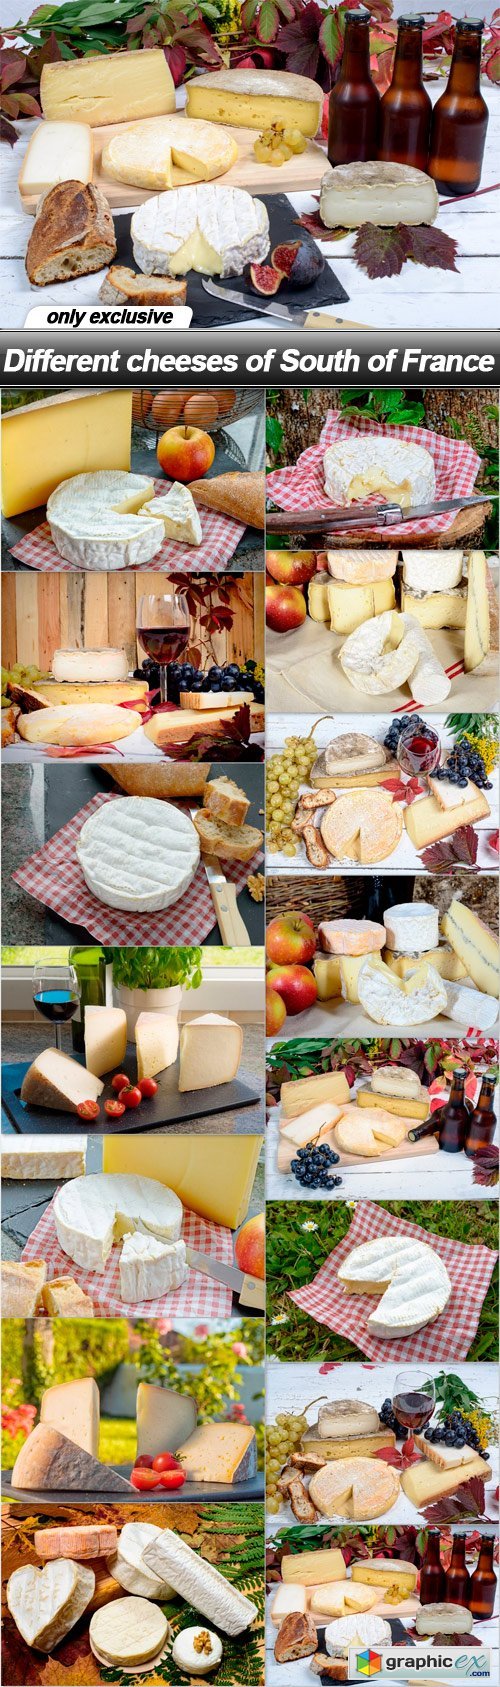 Different cheeses of South of France - 15 UHQ JPEG